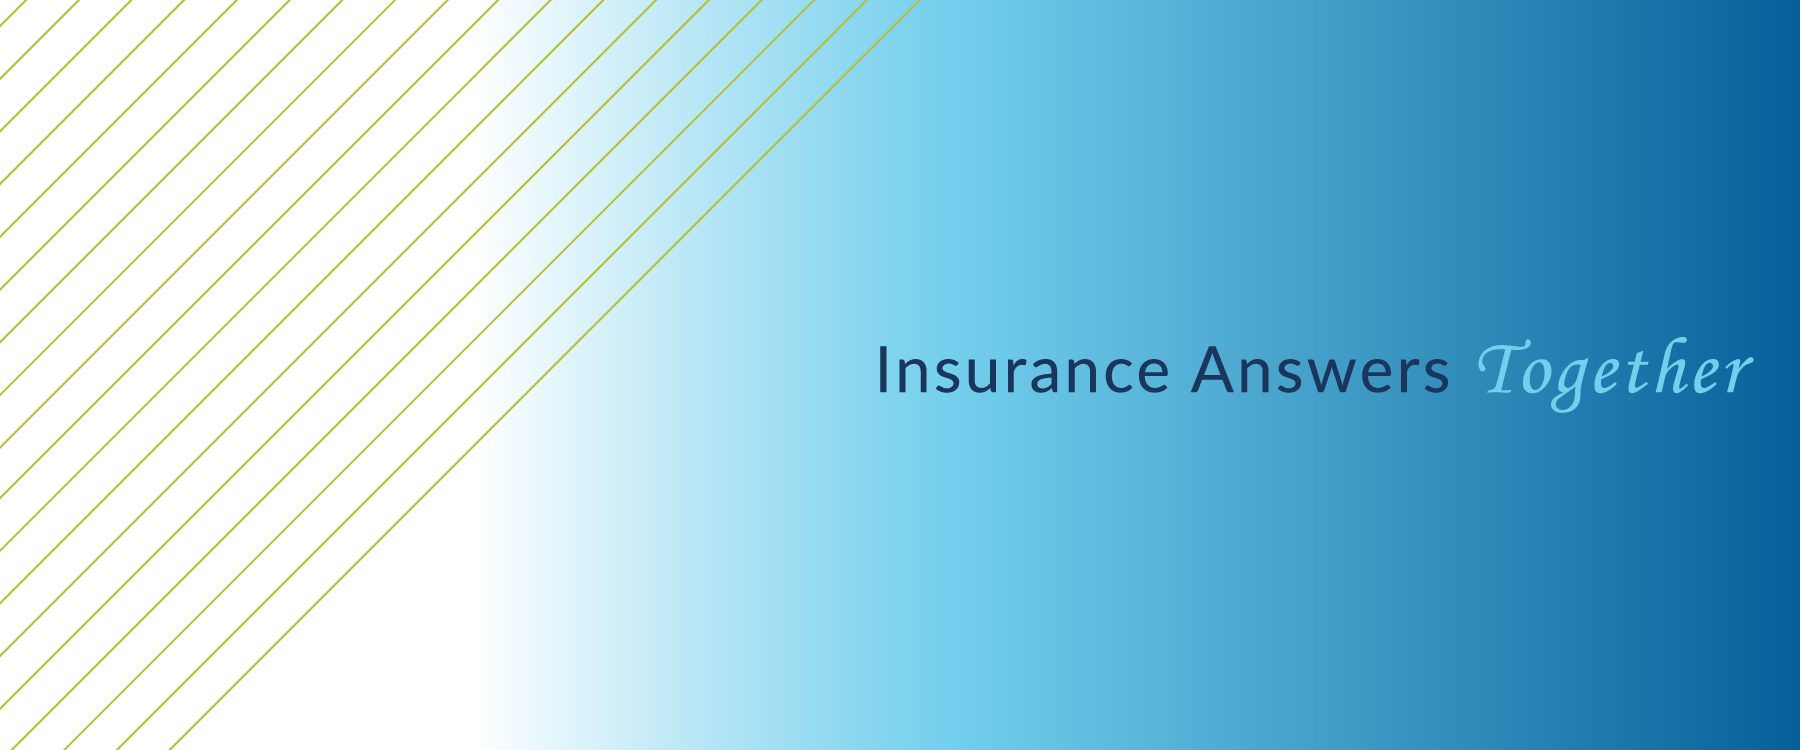 Website - Insurance Answers Together Banner-01